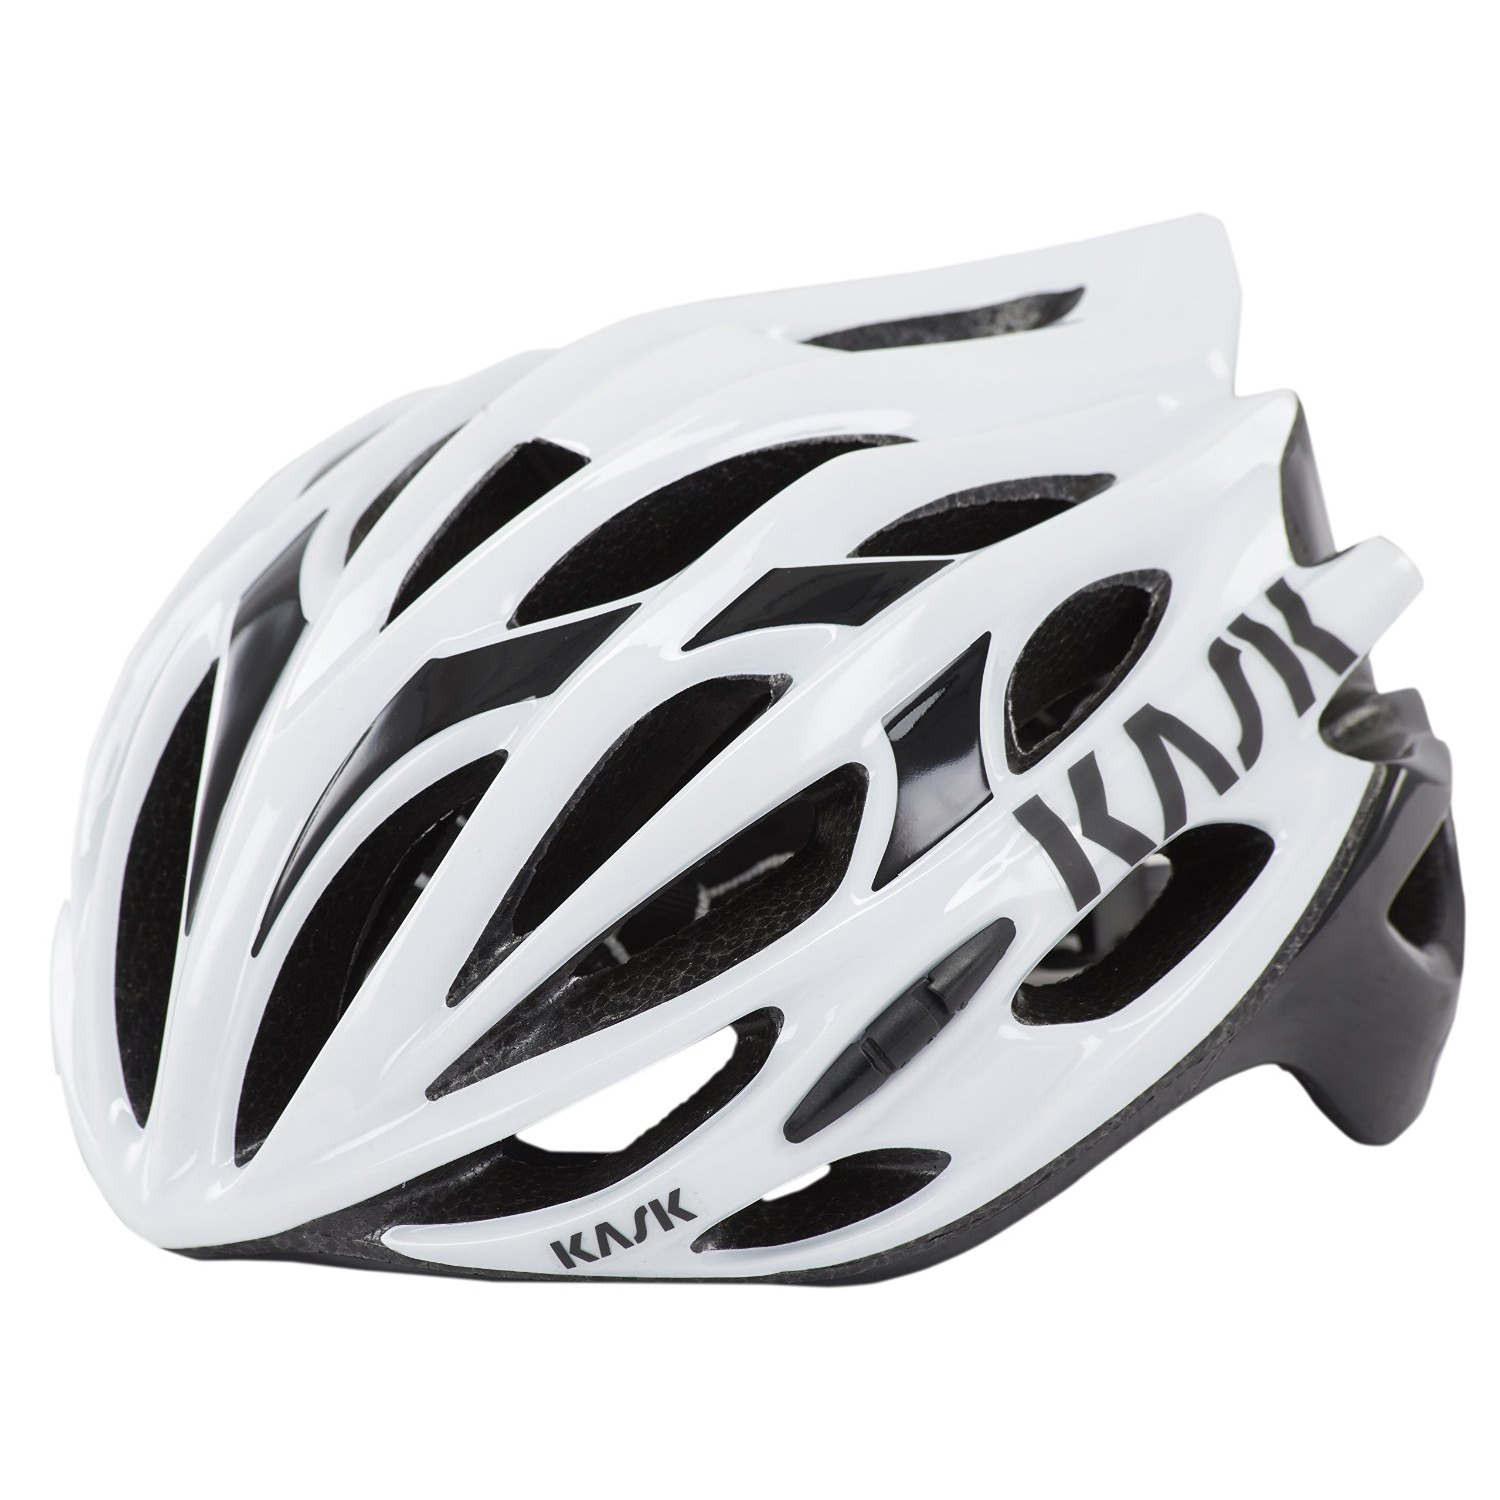 Kask Mojito Cycling Helmet White / Black Large CPSC *Damaged Packaging*